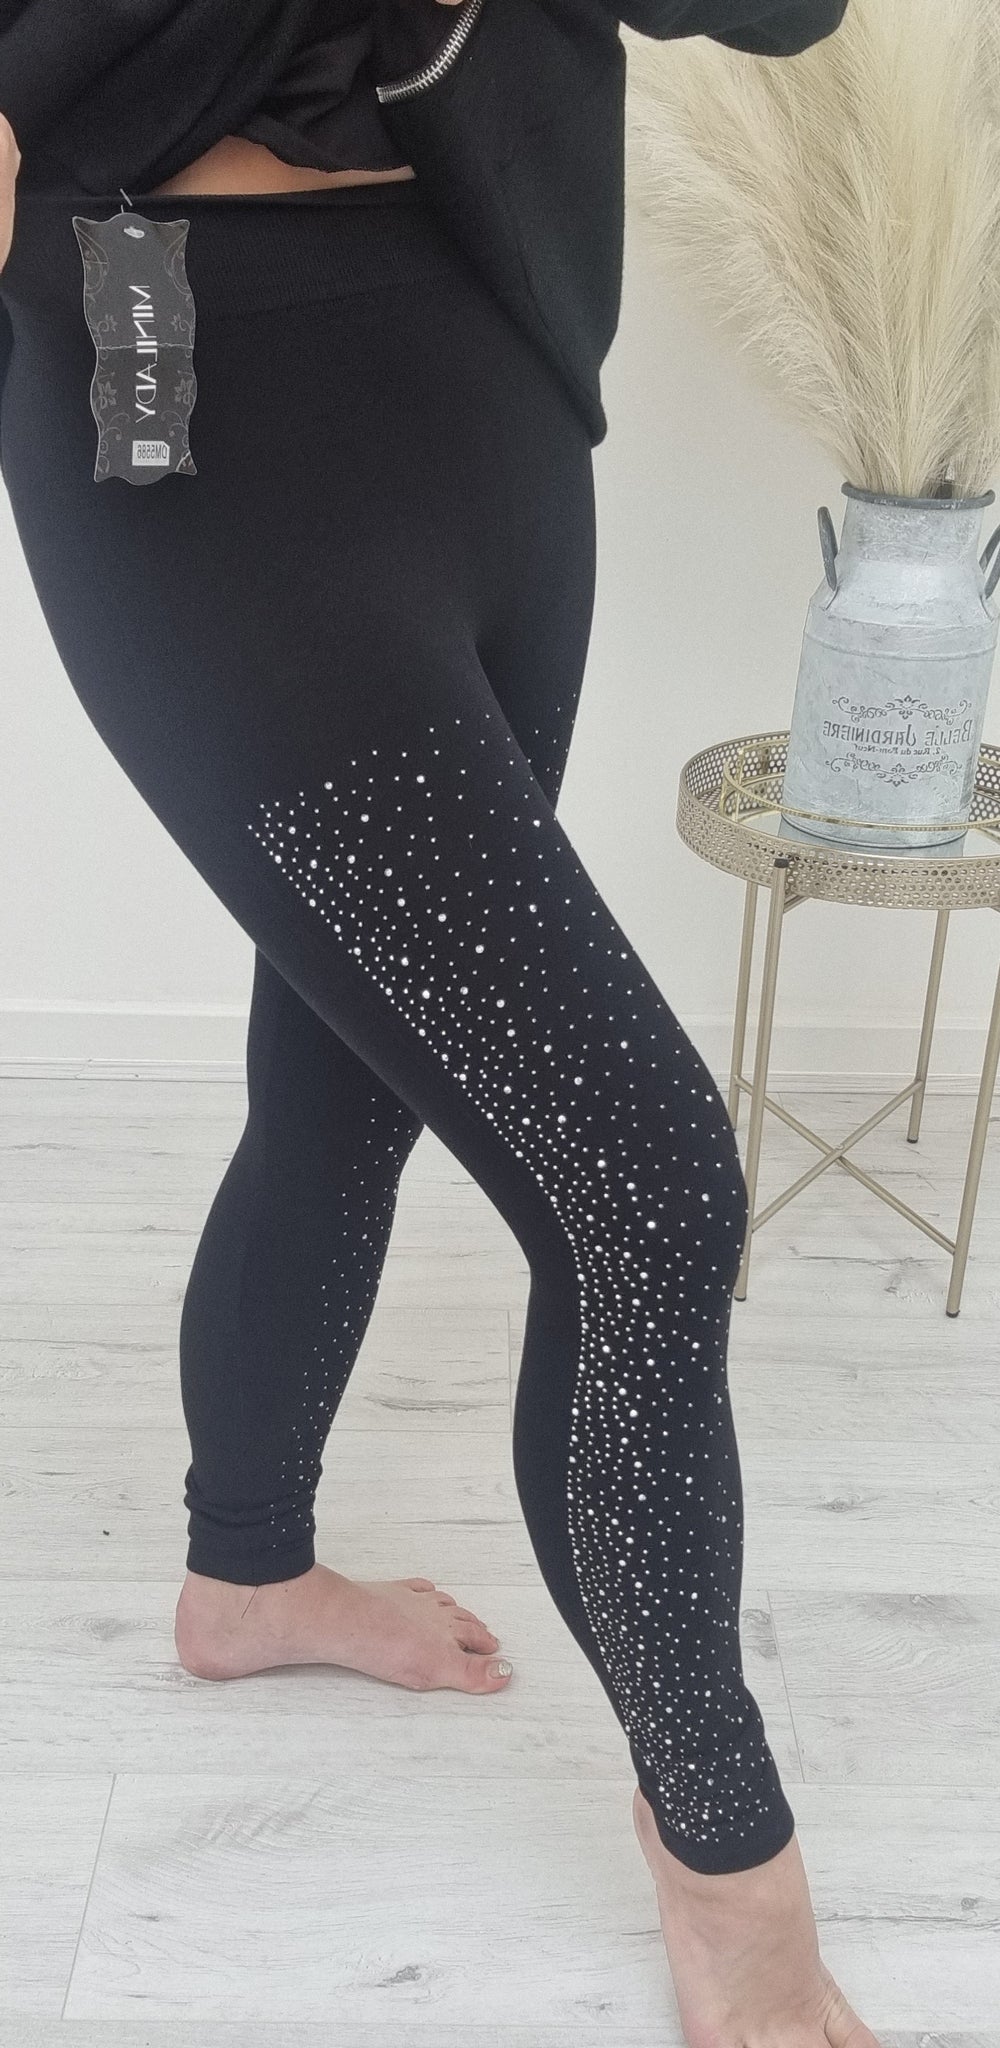 Sequin Leggings Styled 6 Ways - Stang & Co